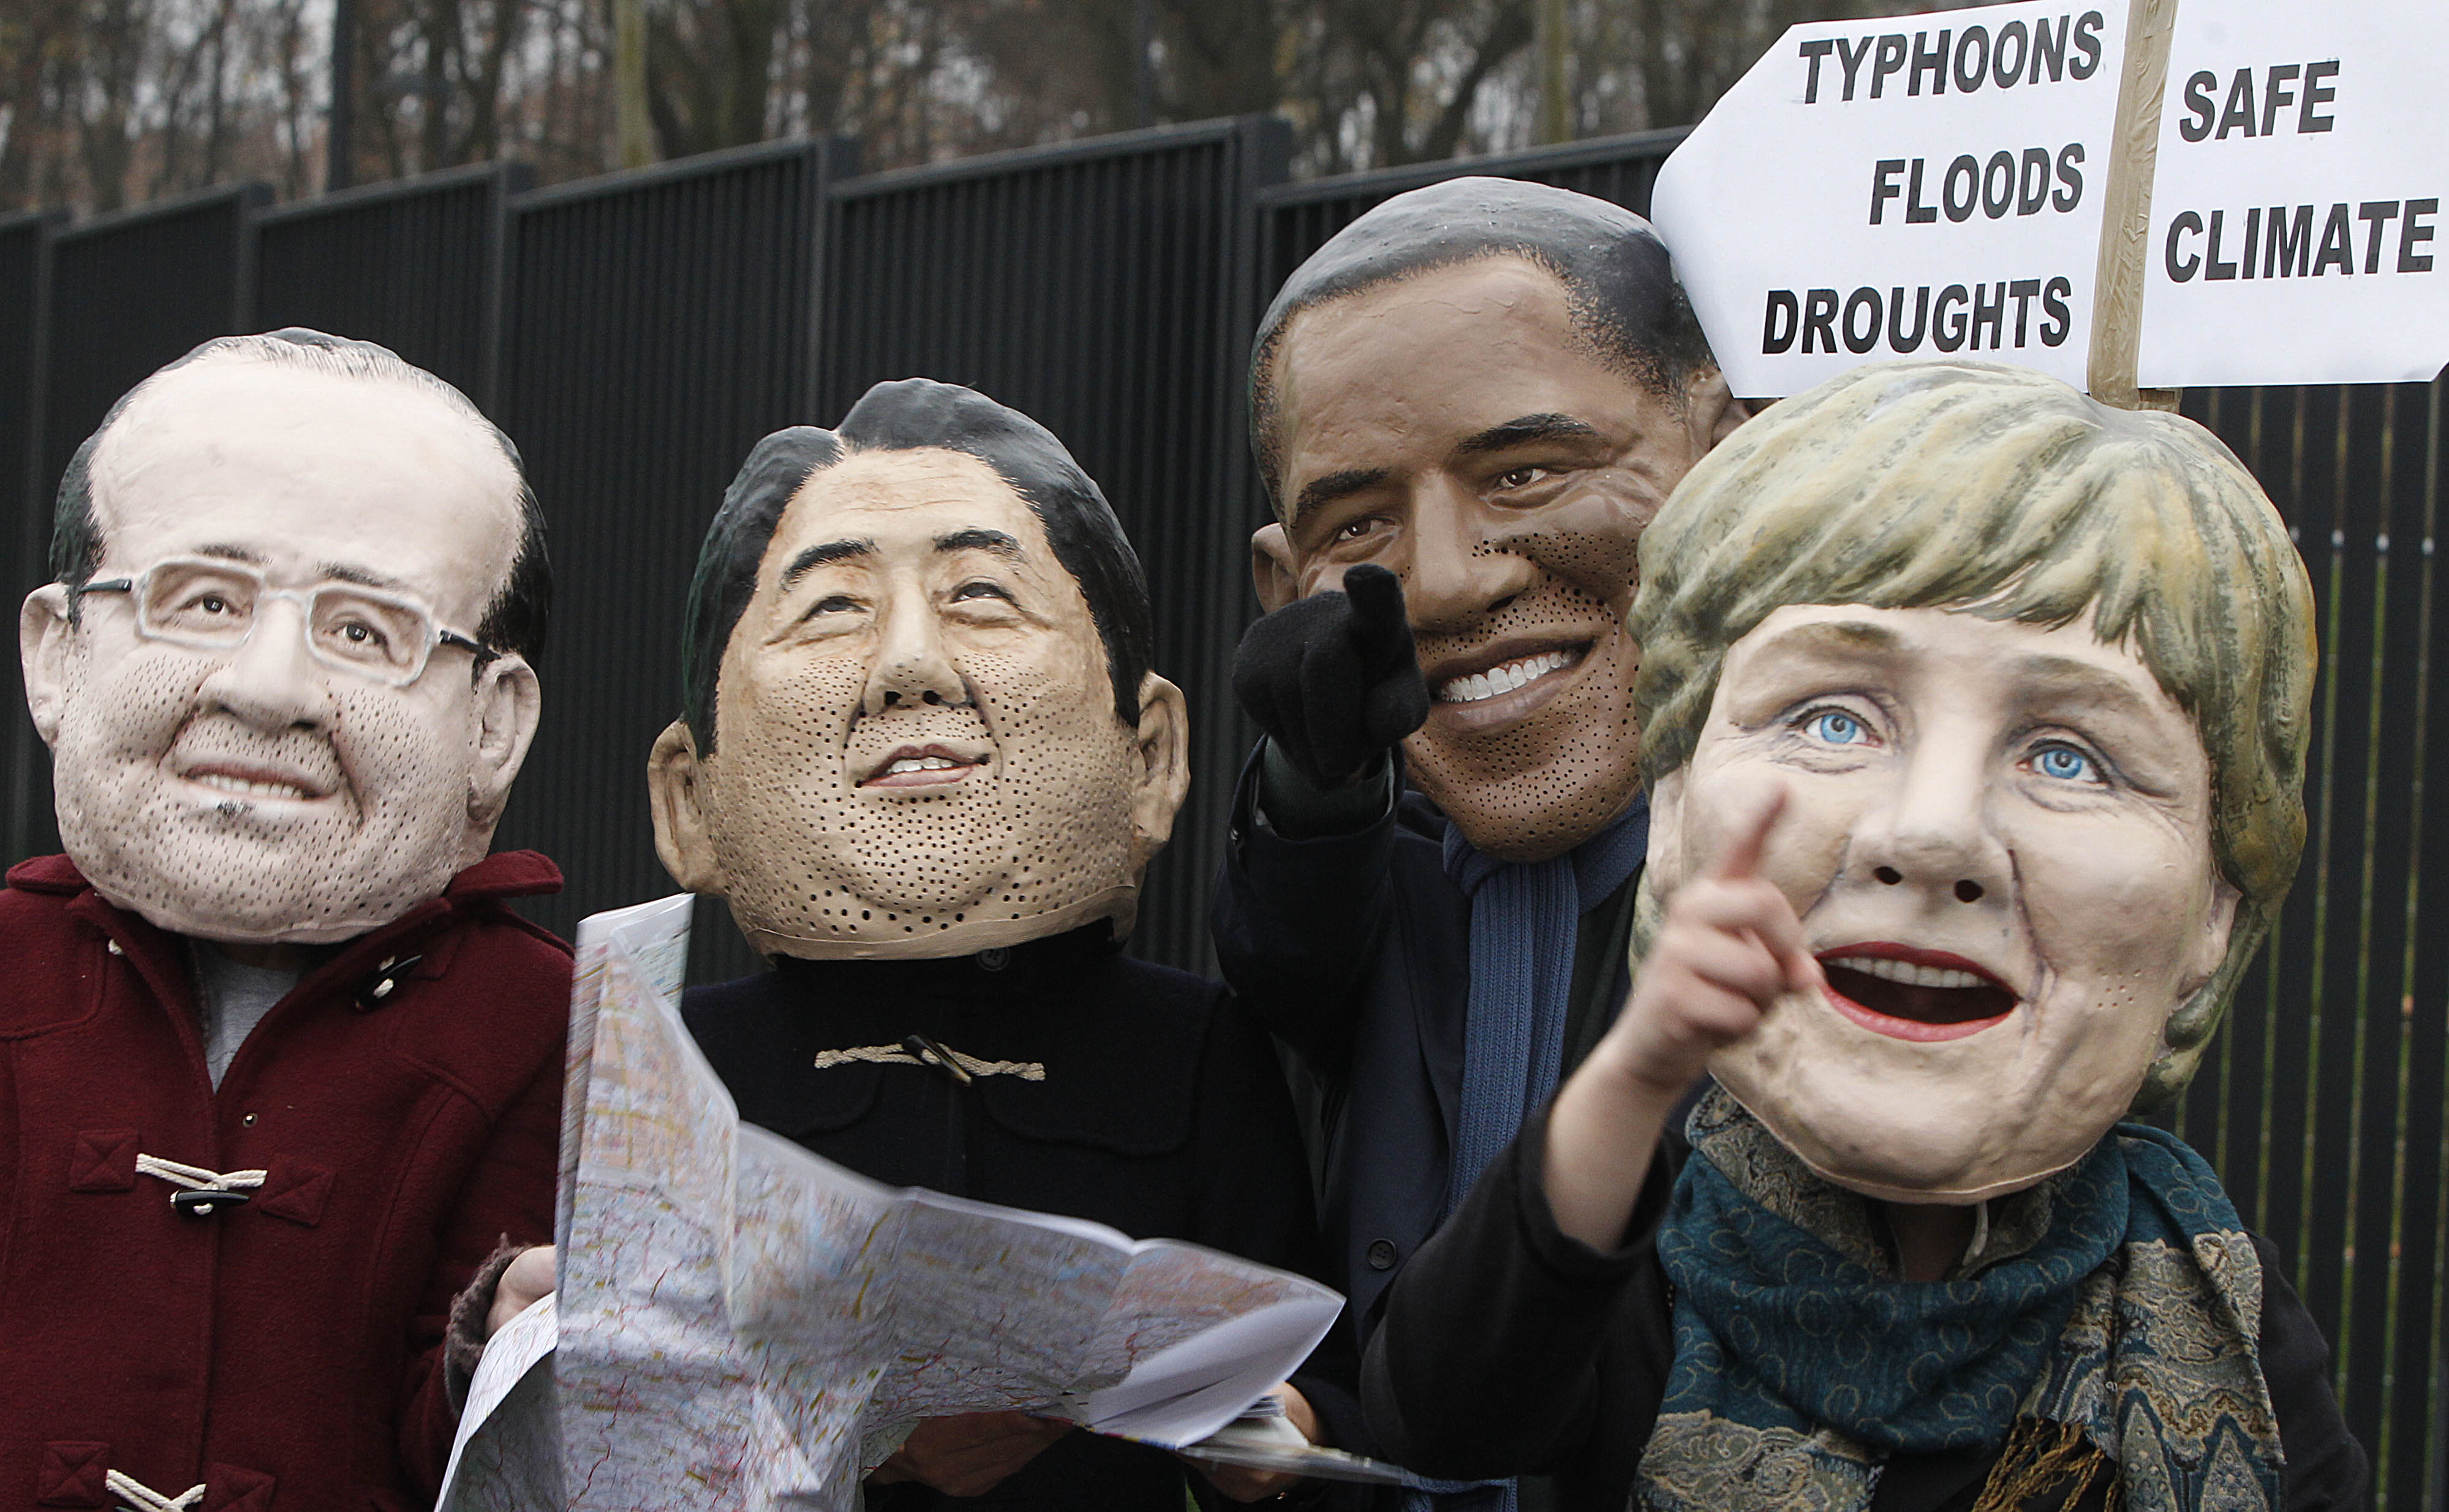 Climate activists donning the masks of leaders point in the direction they want